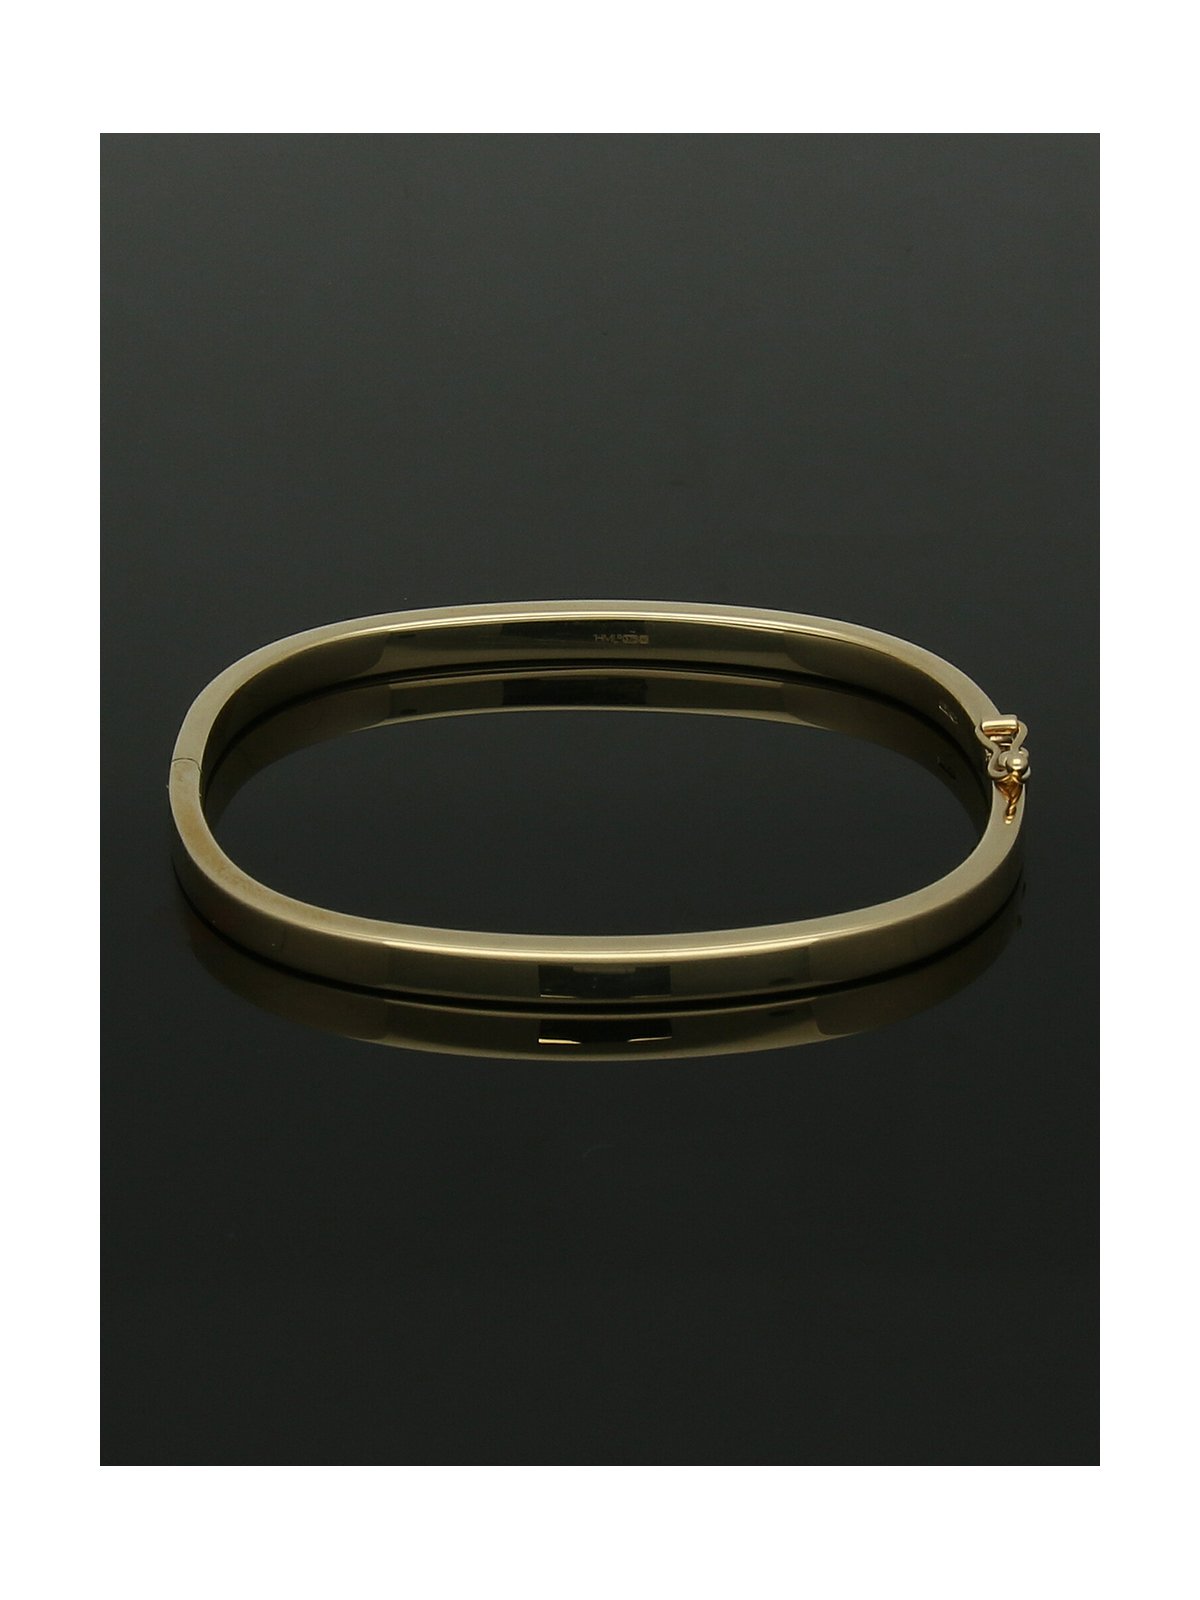 4mm TV Shaped Solid Bangle in 9ct Yellow Gold